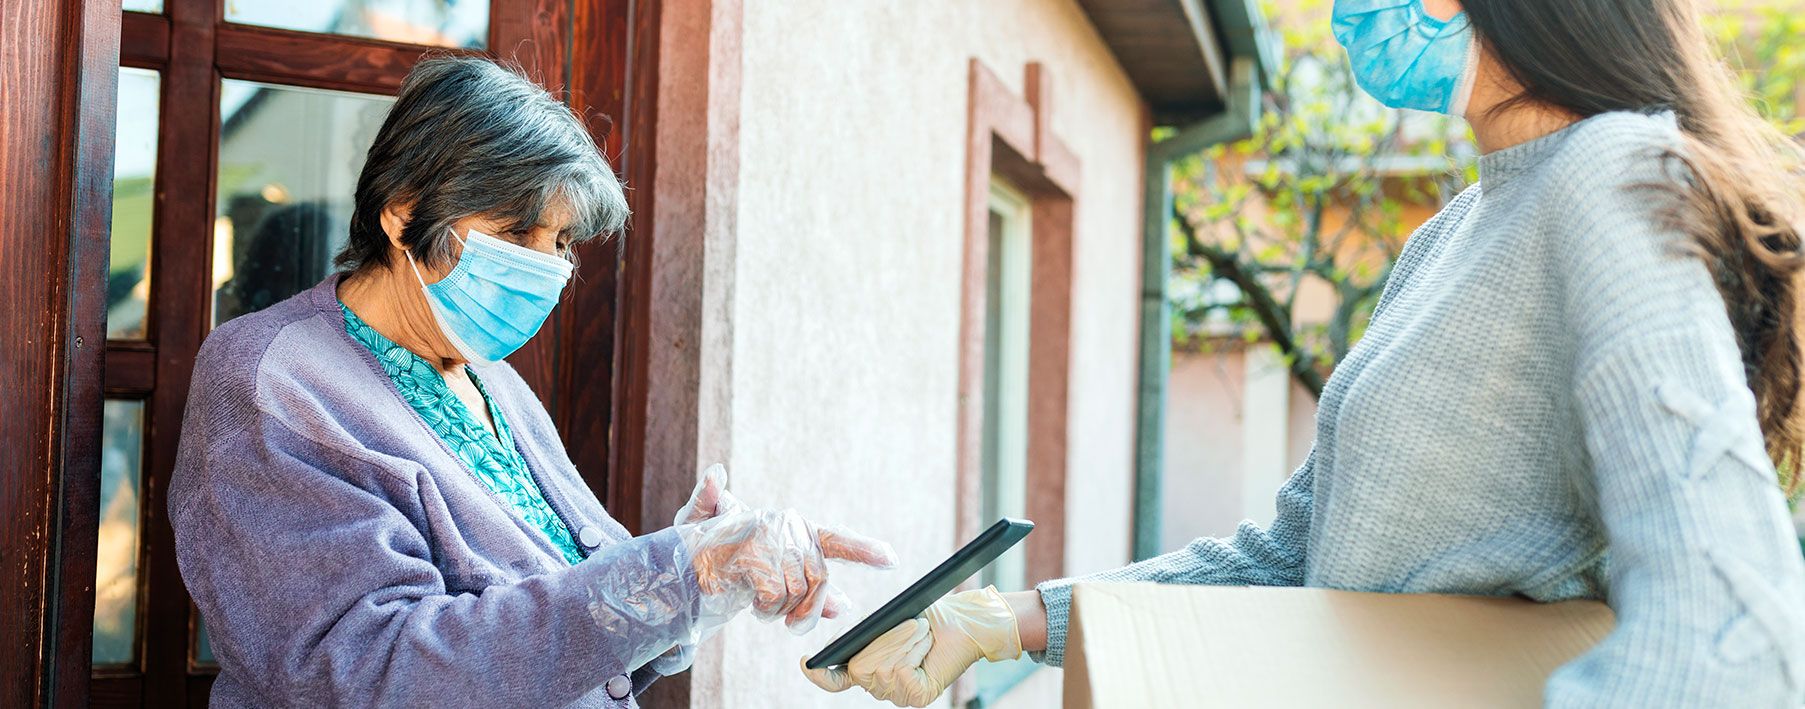 A woman in a mask delivering a package to a senior in a mask.